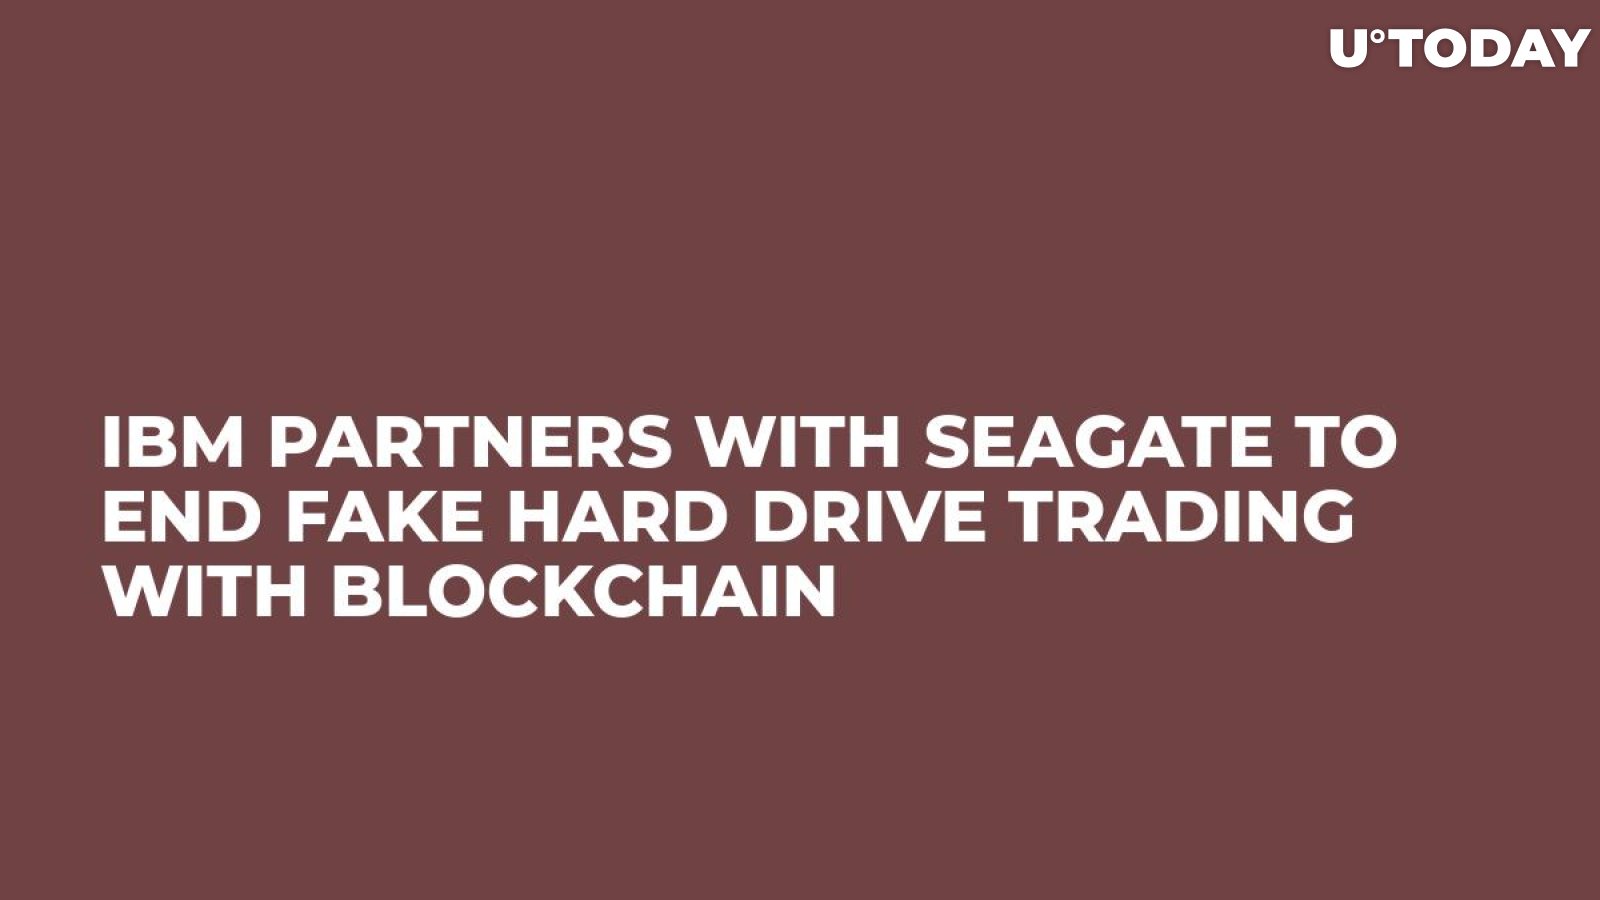 IBM Partners with Seagate to End Fake Hard Drive Trading with Blockchain